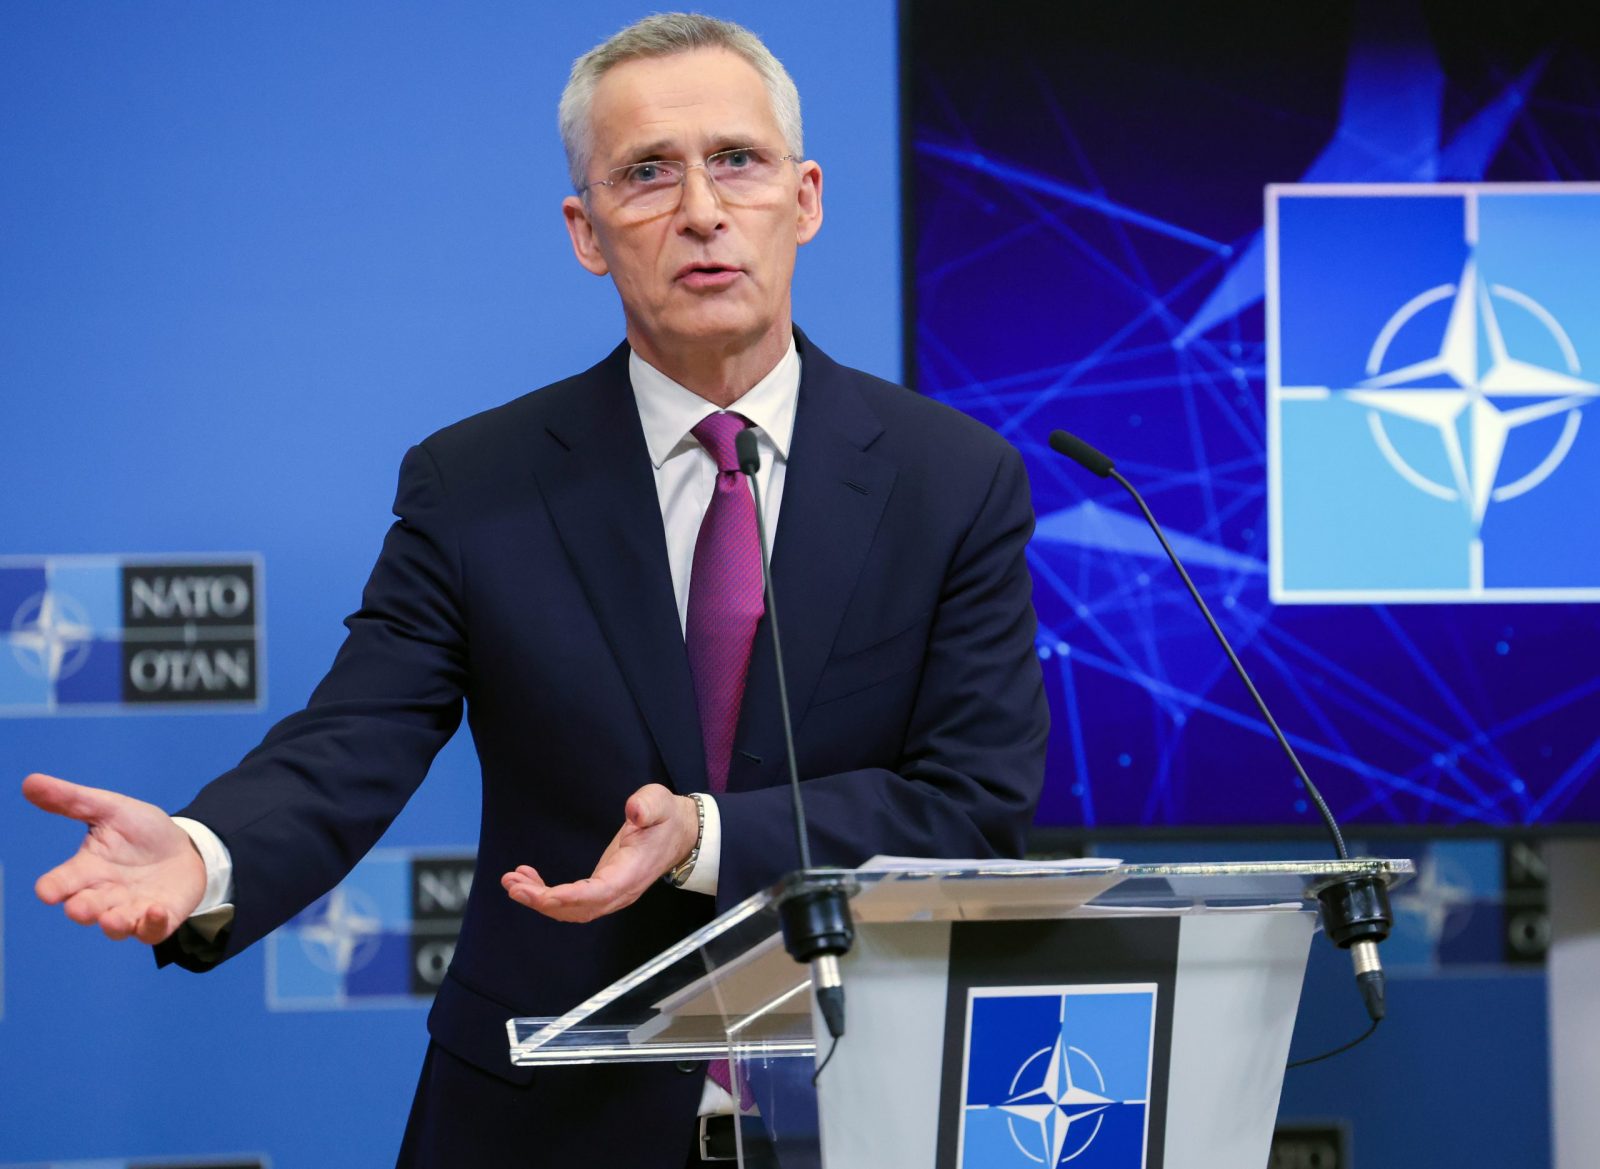 epa10559739 NATO Secretary-General Jens Stoltenberg holds a press conference after a Foreign Ministers meeting at the North Atlantic Treaty Organisation headquarters in Brussels, Belgium, 05 April 2023.  EPA/OLIVIER MATTHYS / POOL